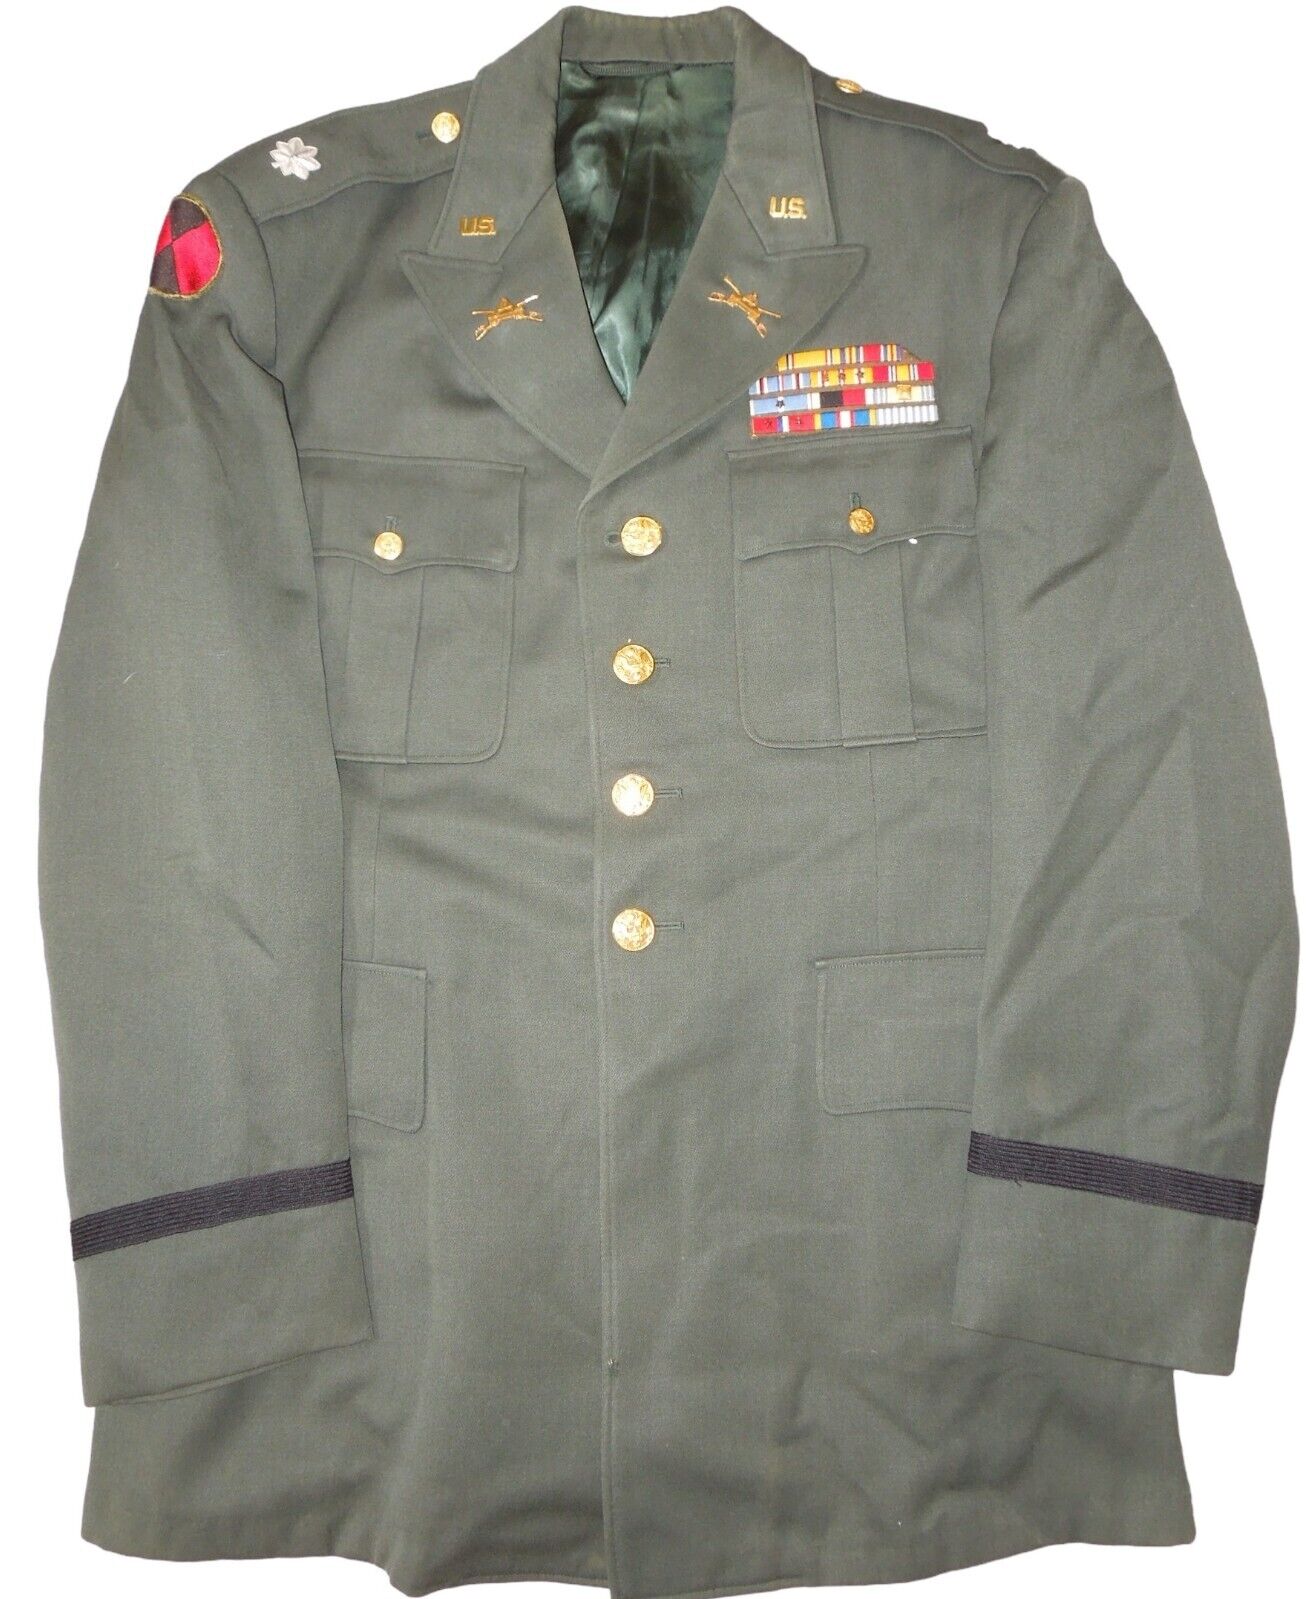 Original WWII - 1950's US Army Lt. Colonel 7th Division Uniform & Ribbons Sz. 42